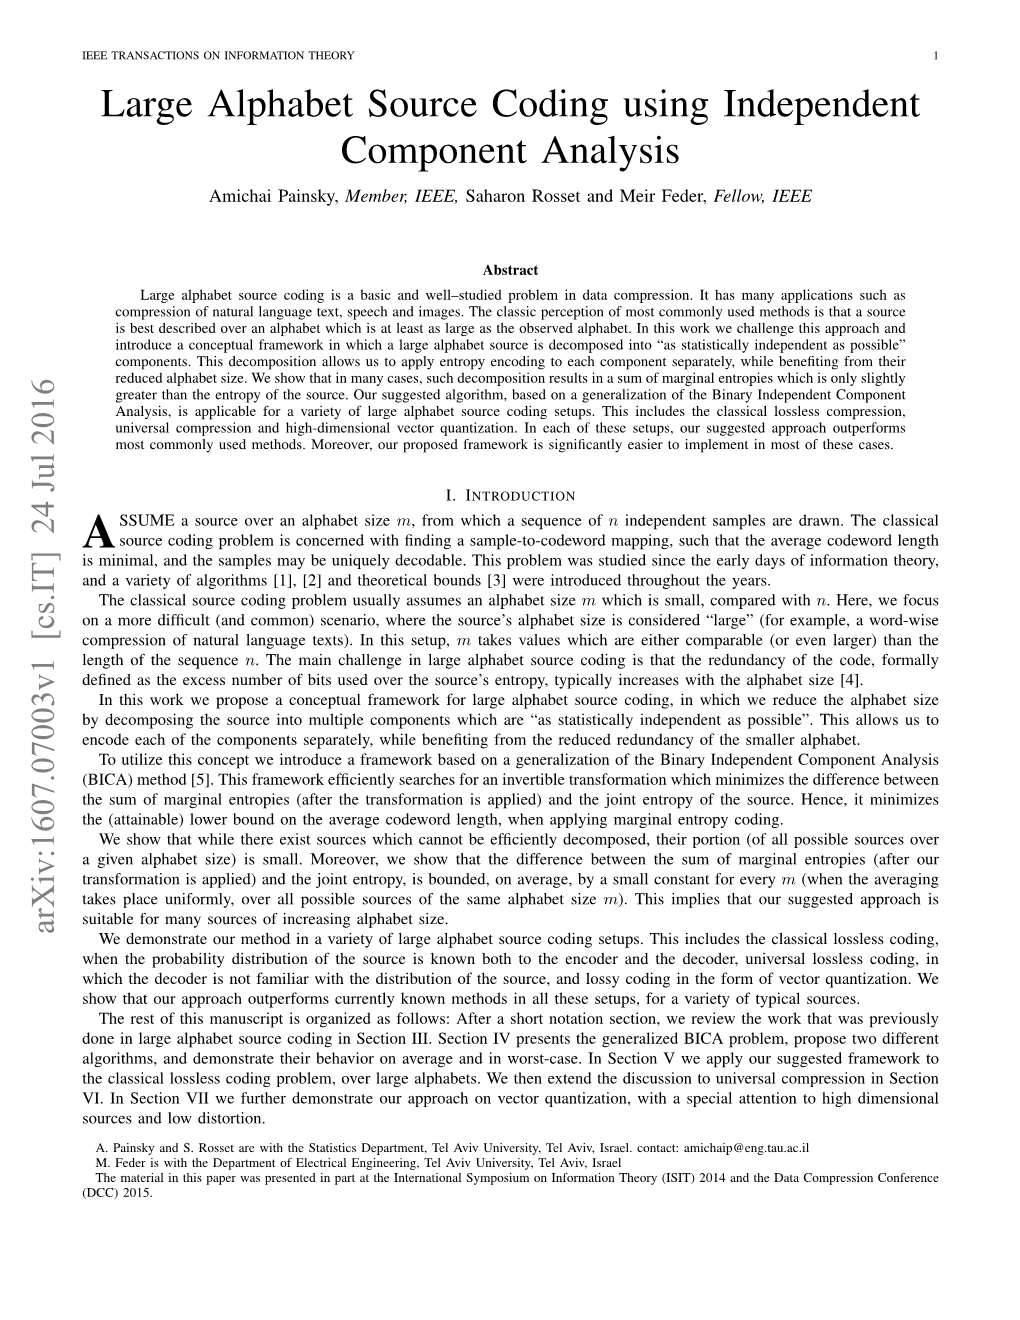 Large Alphabet Source Coding Using Independent Component Analysis Amichai Painsky, Member, IEEE, Saharon Rosset and Meir Feder, Fellow, IEEE